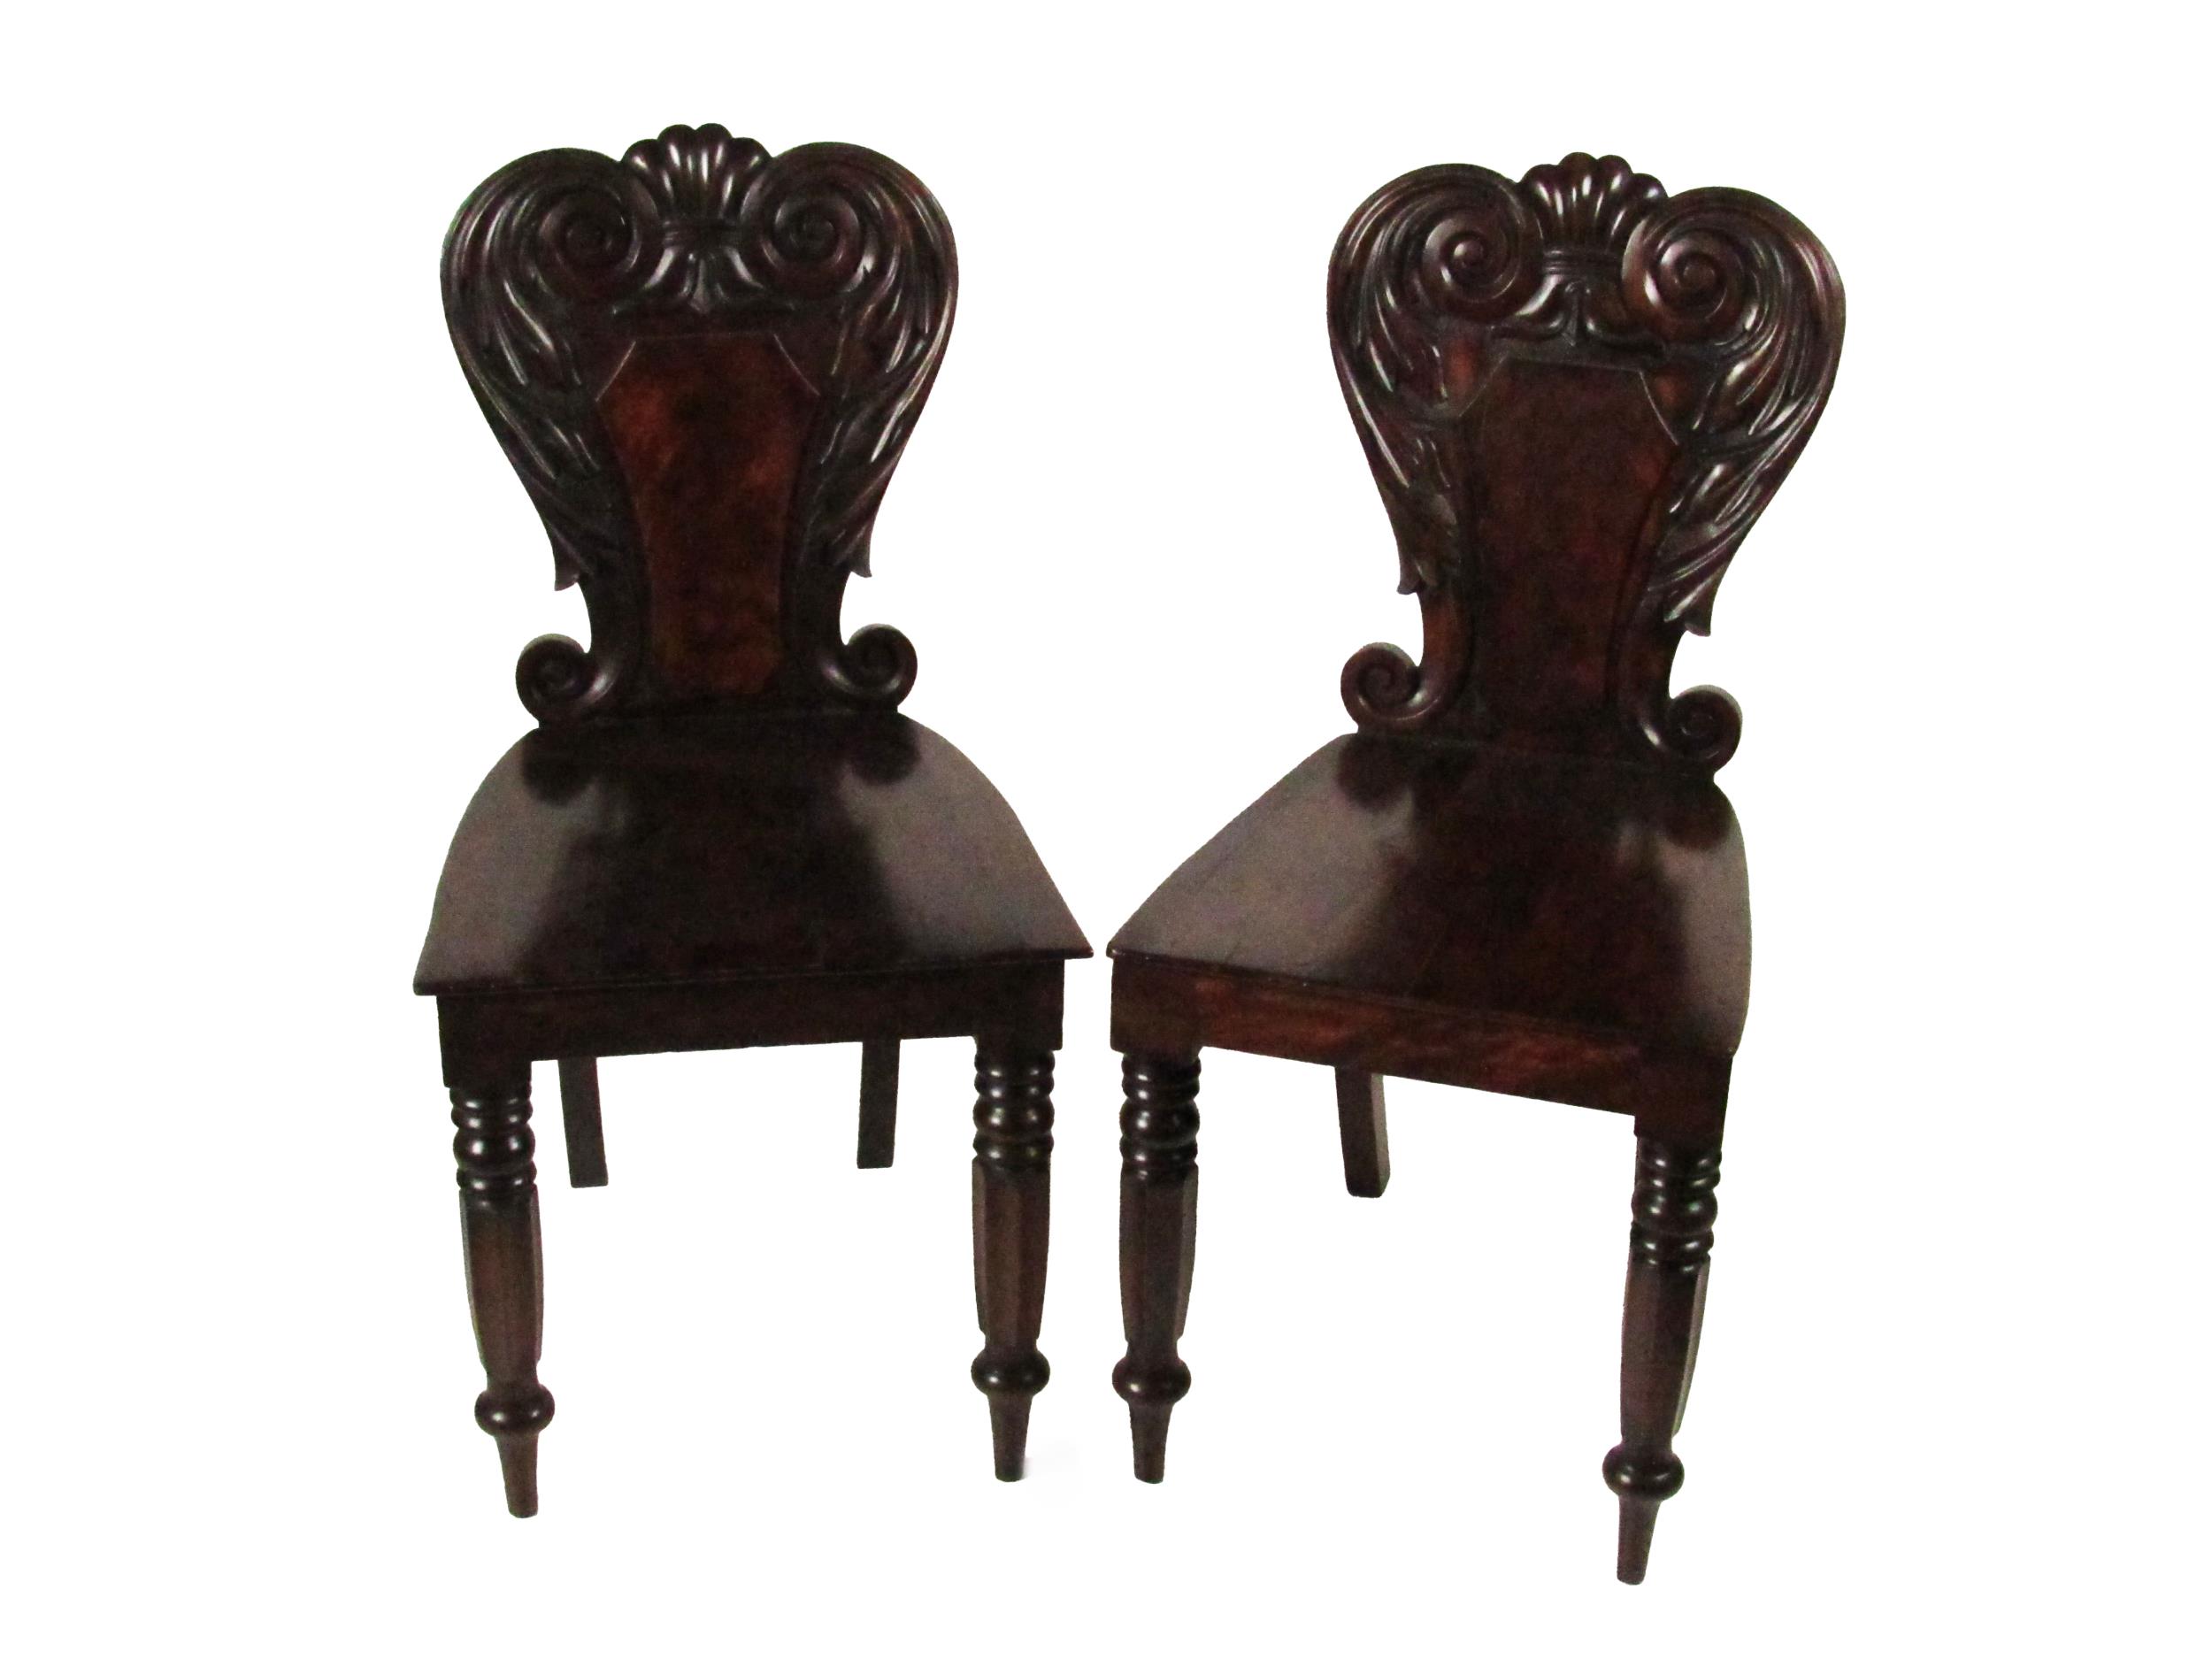 A pair of William IV Irish mahogany Hall Chairs, with carved shield backs over solid seats on